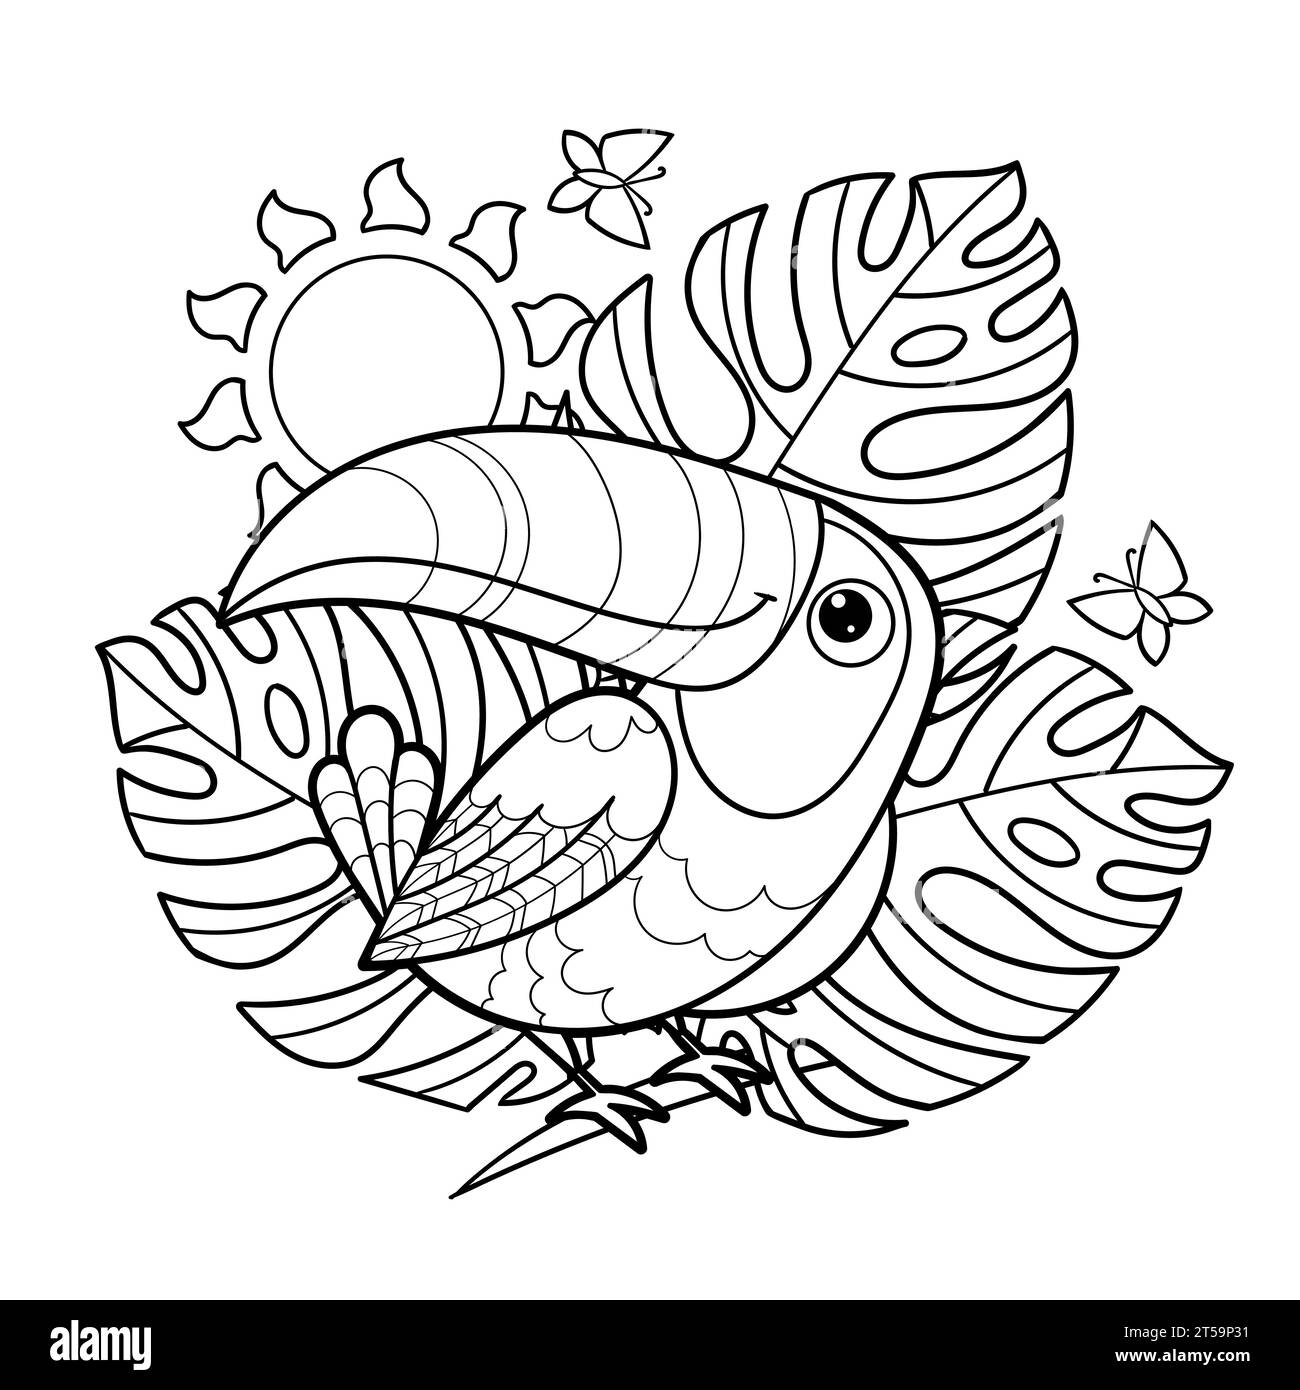 Cheerful toucan among the leaves. Black and white linear drawing. For children's design of coloring books, prints, posters, cards, stickers, puzzles, Stock Vector